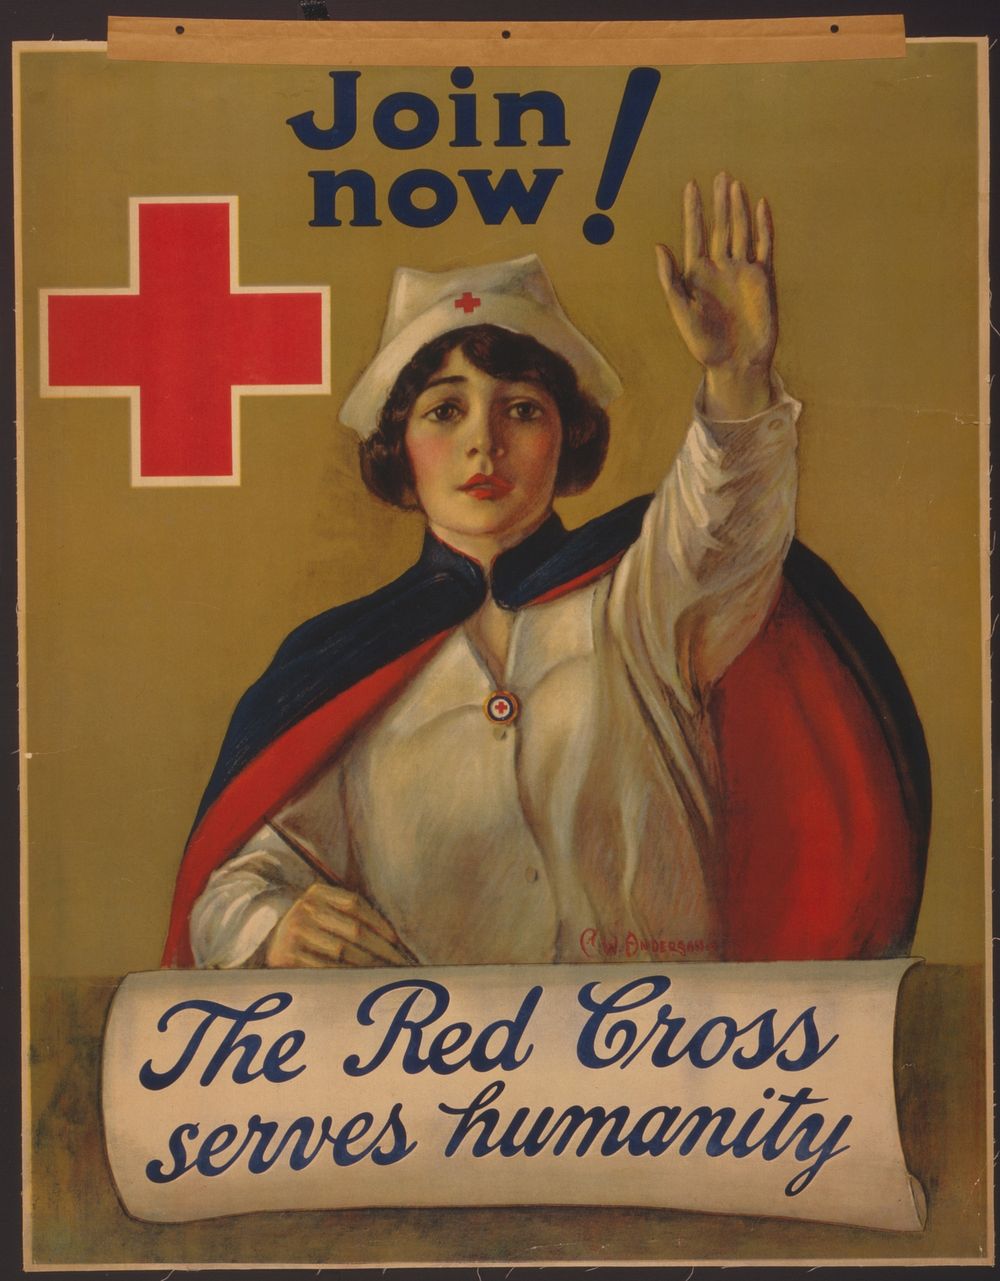 The Red Cross serves humanity Join now C.W. Anderson.